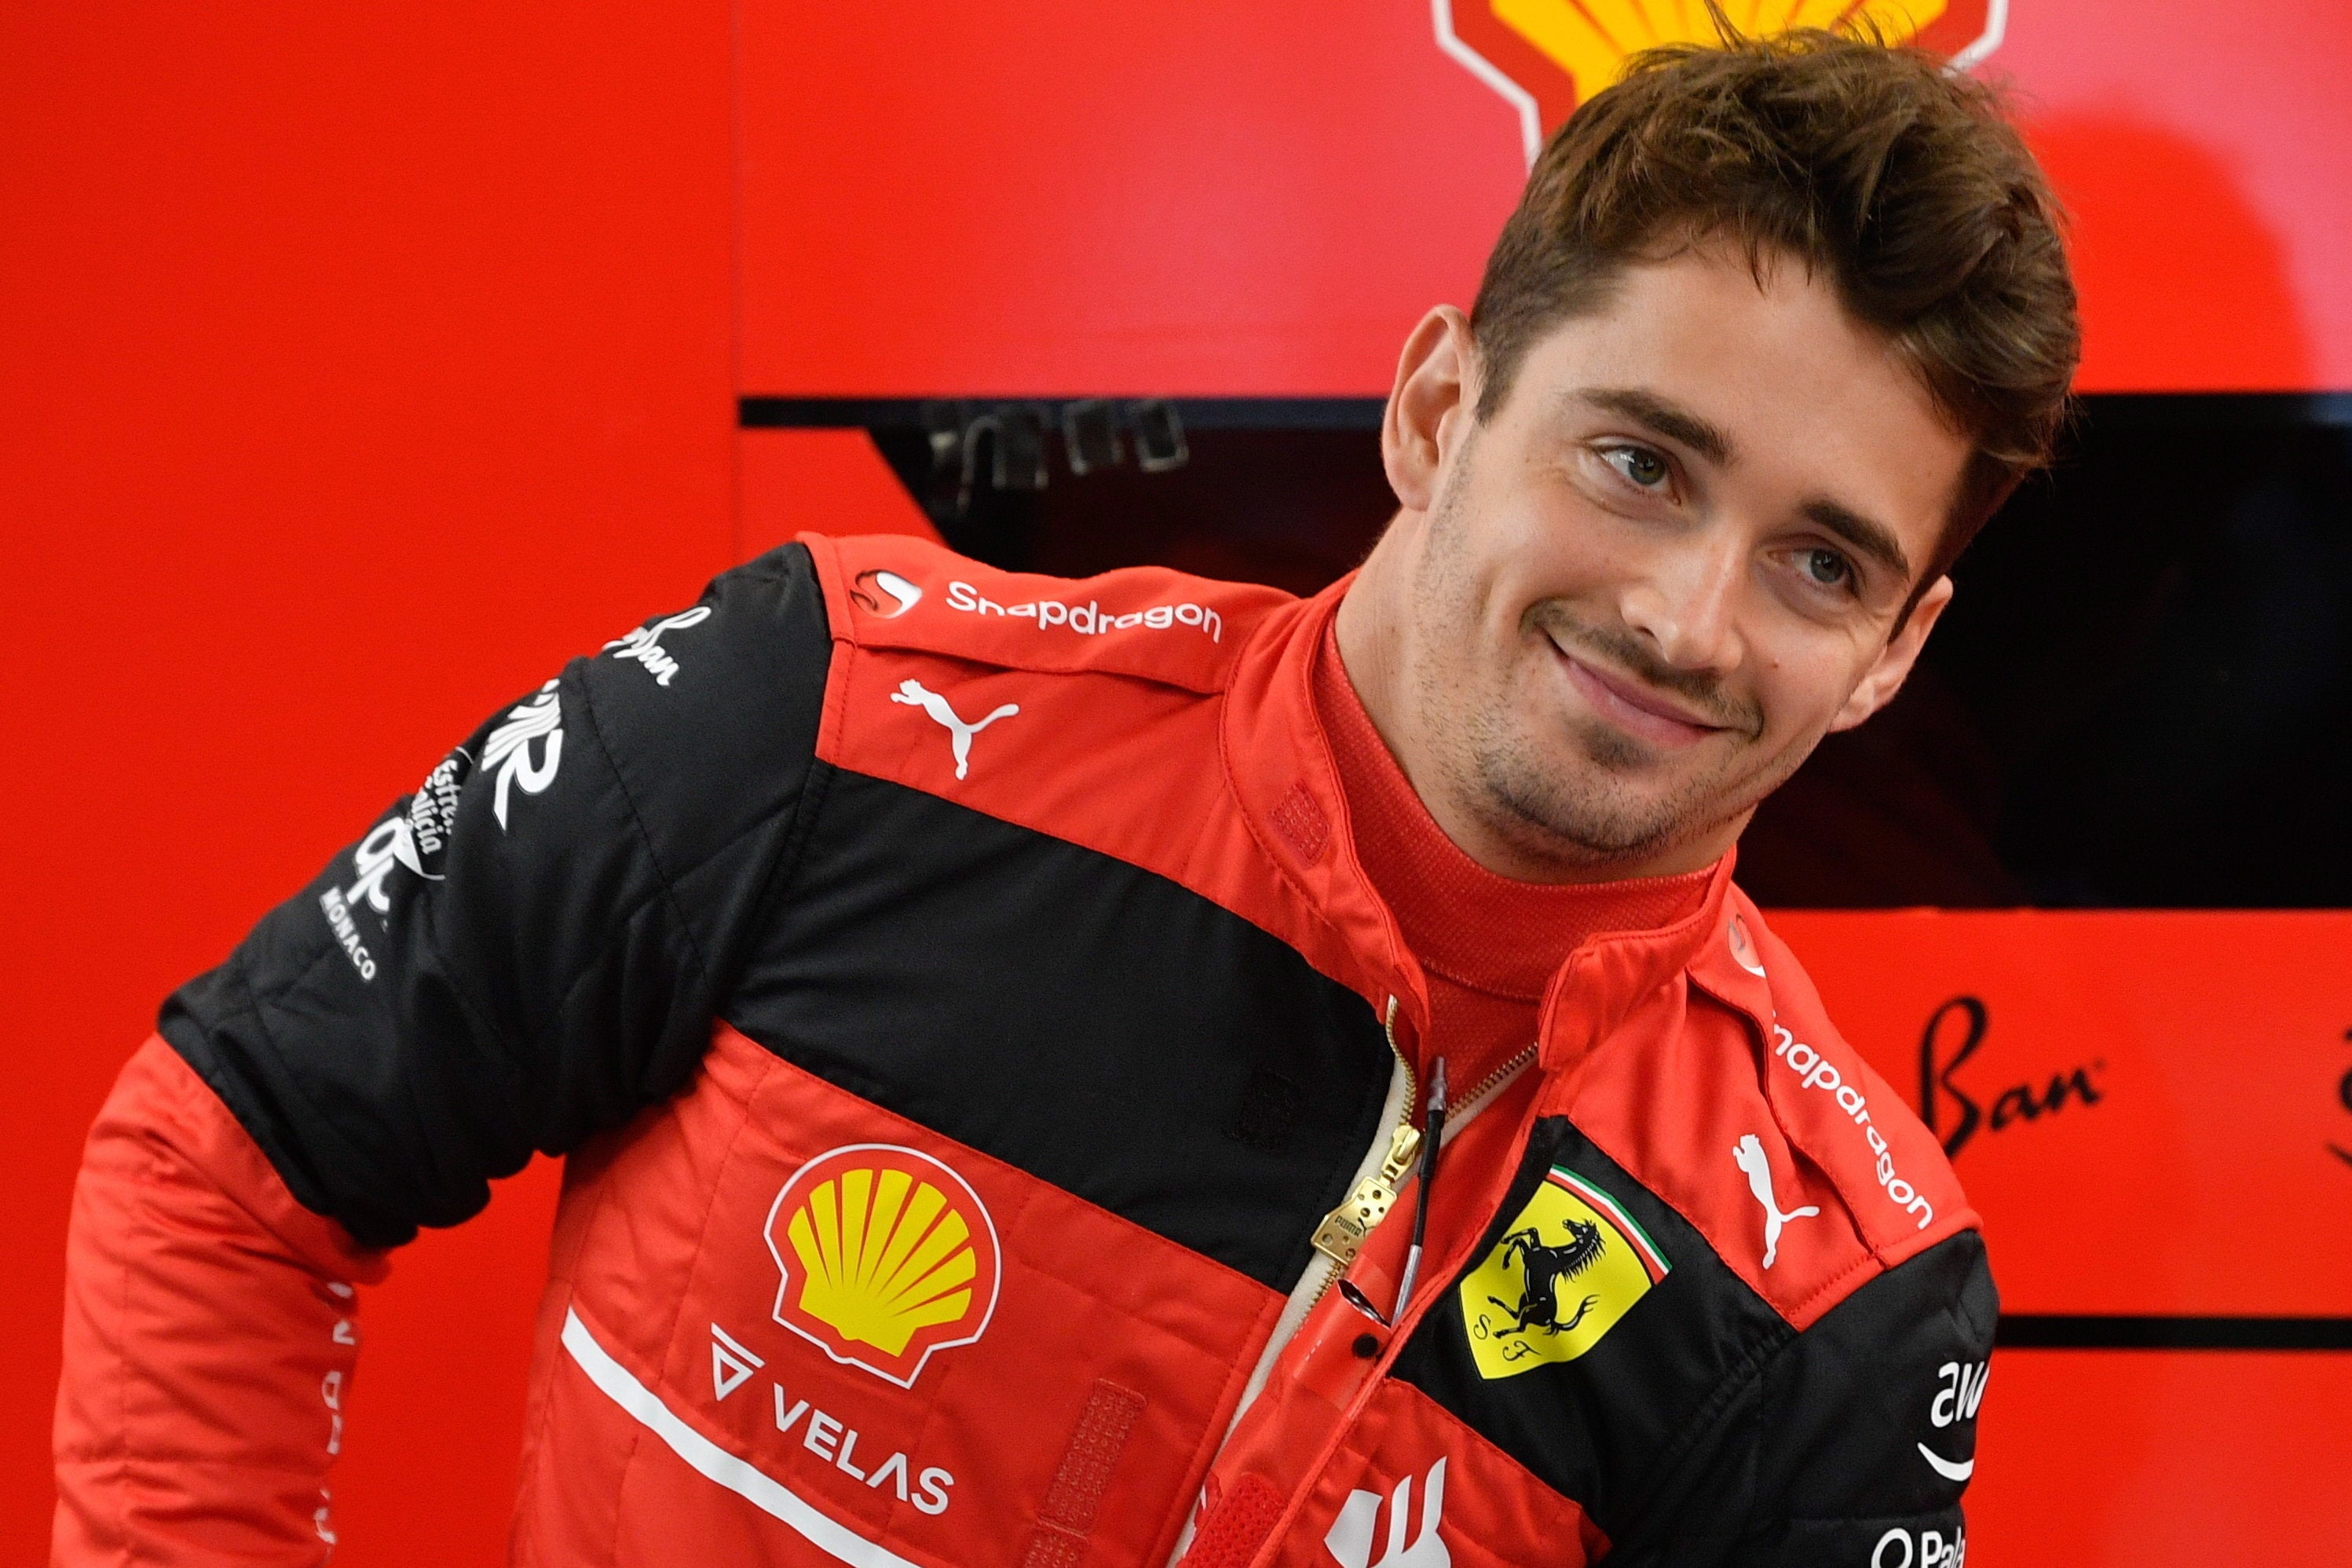 Ferrari’s Charles Leclerc believes he can still win the World Championship